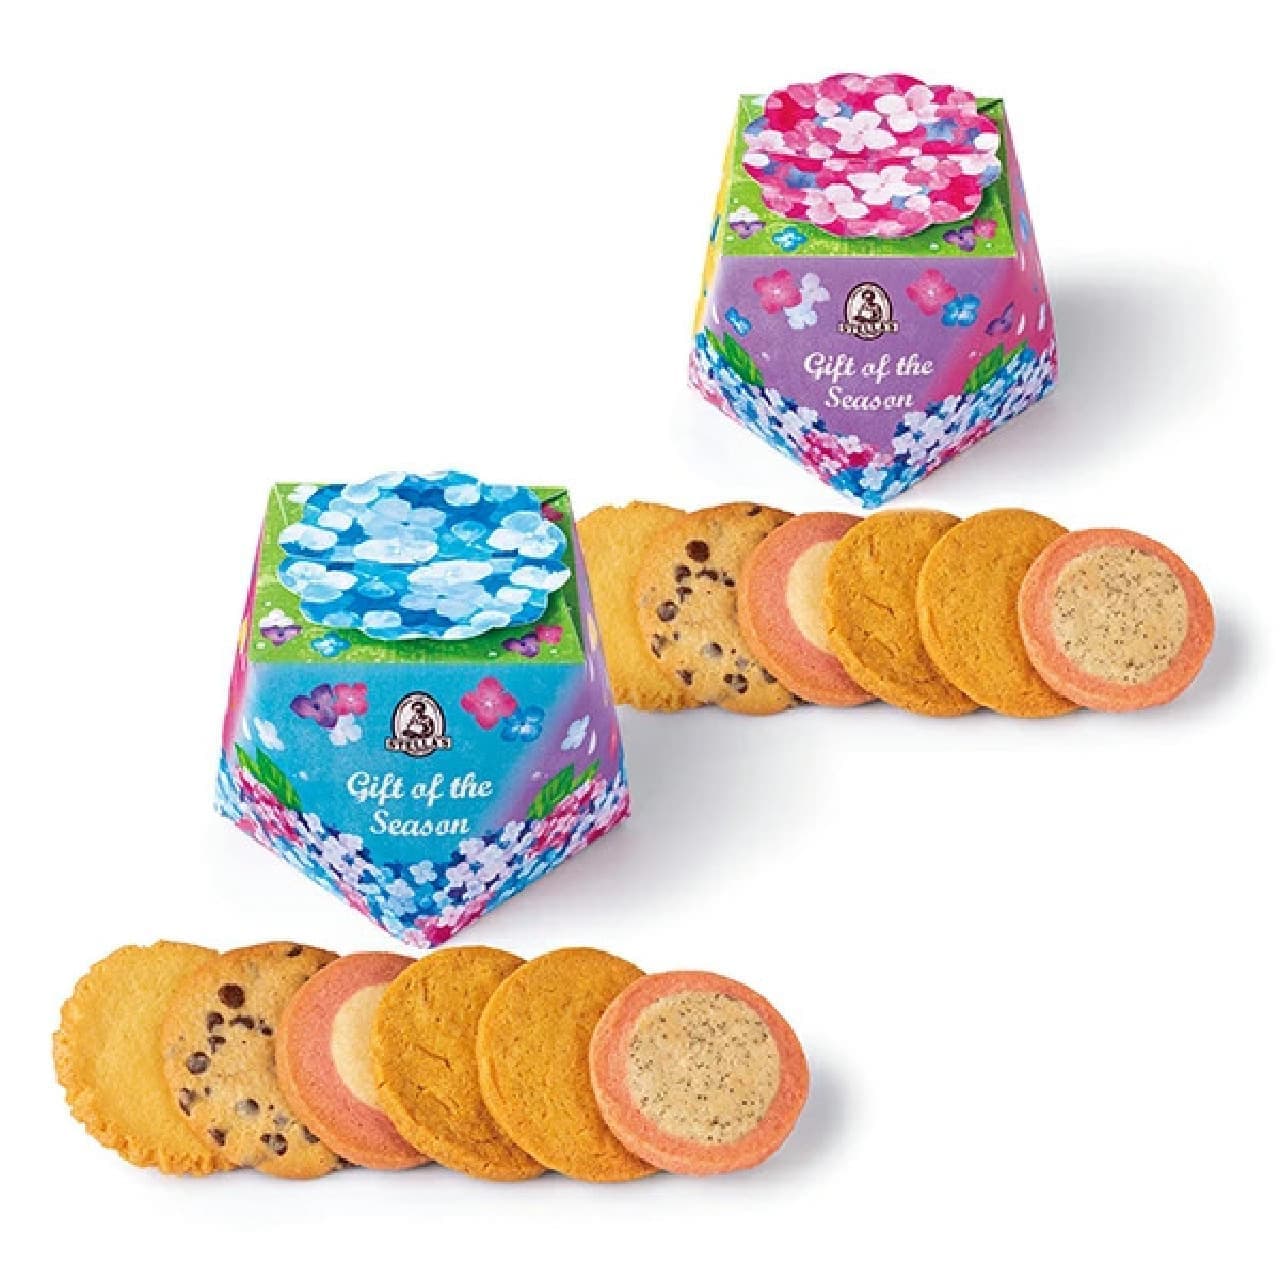 Antostella] Perfect for small summer gifts! Featured Cookie Gifts for Gift Giving